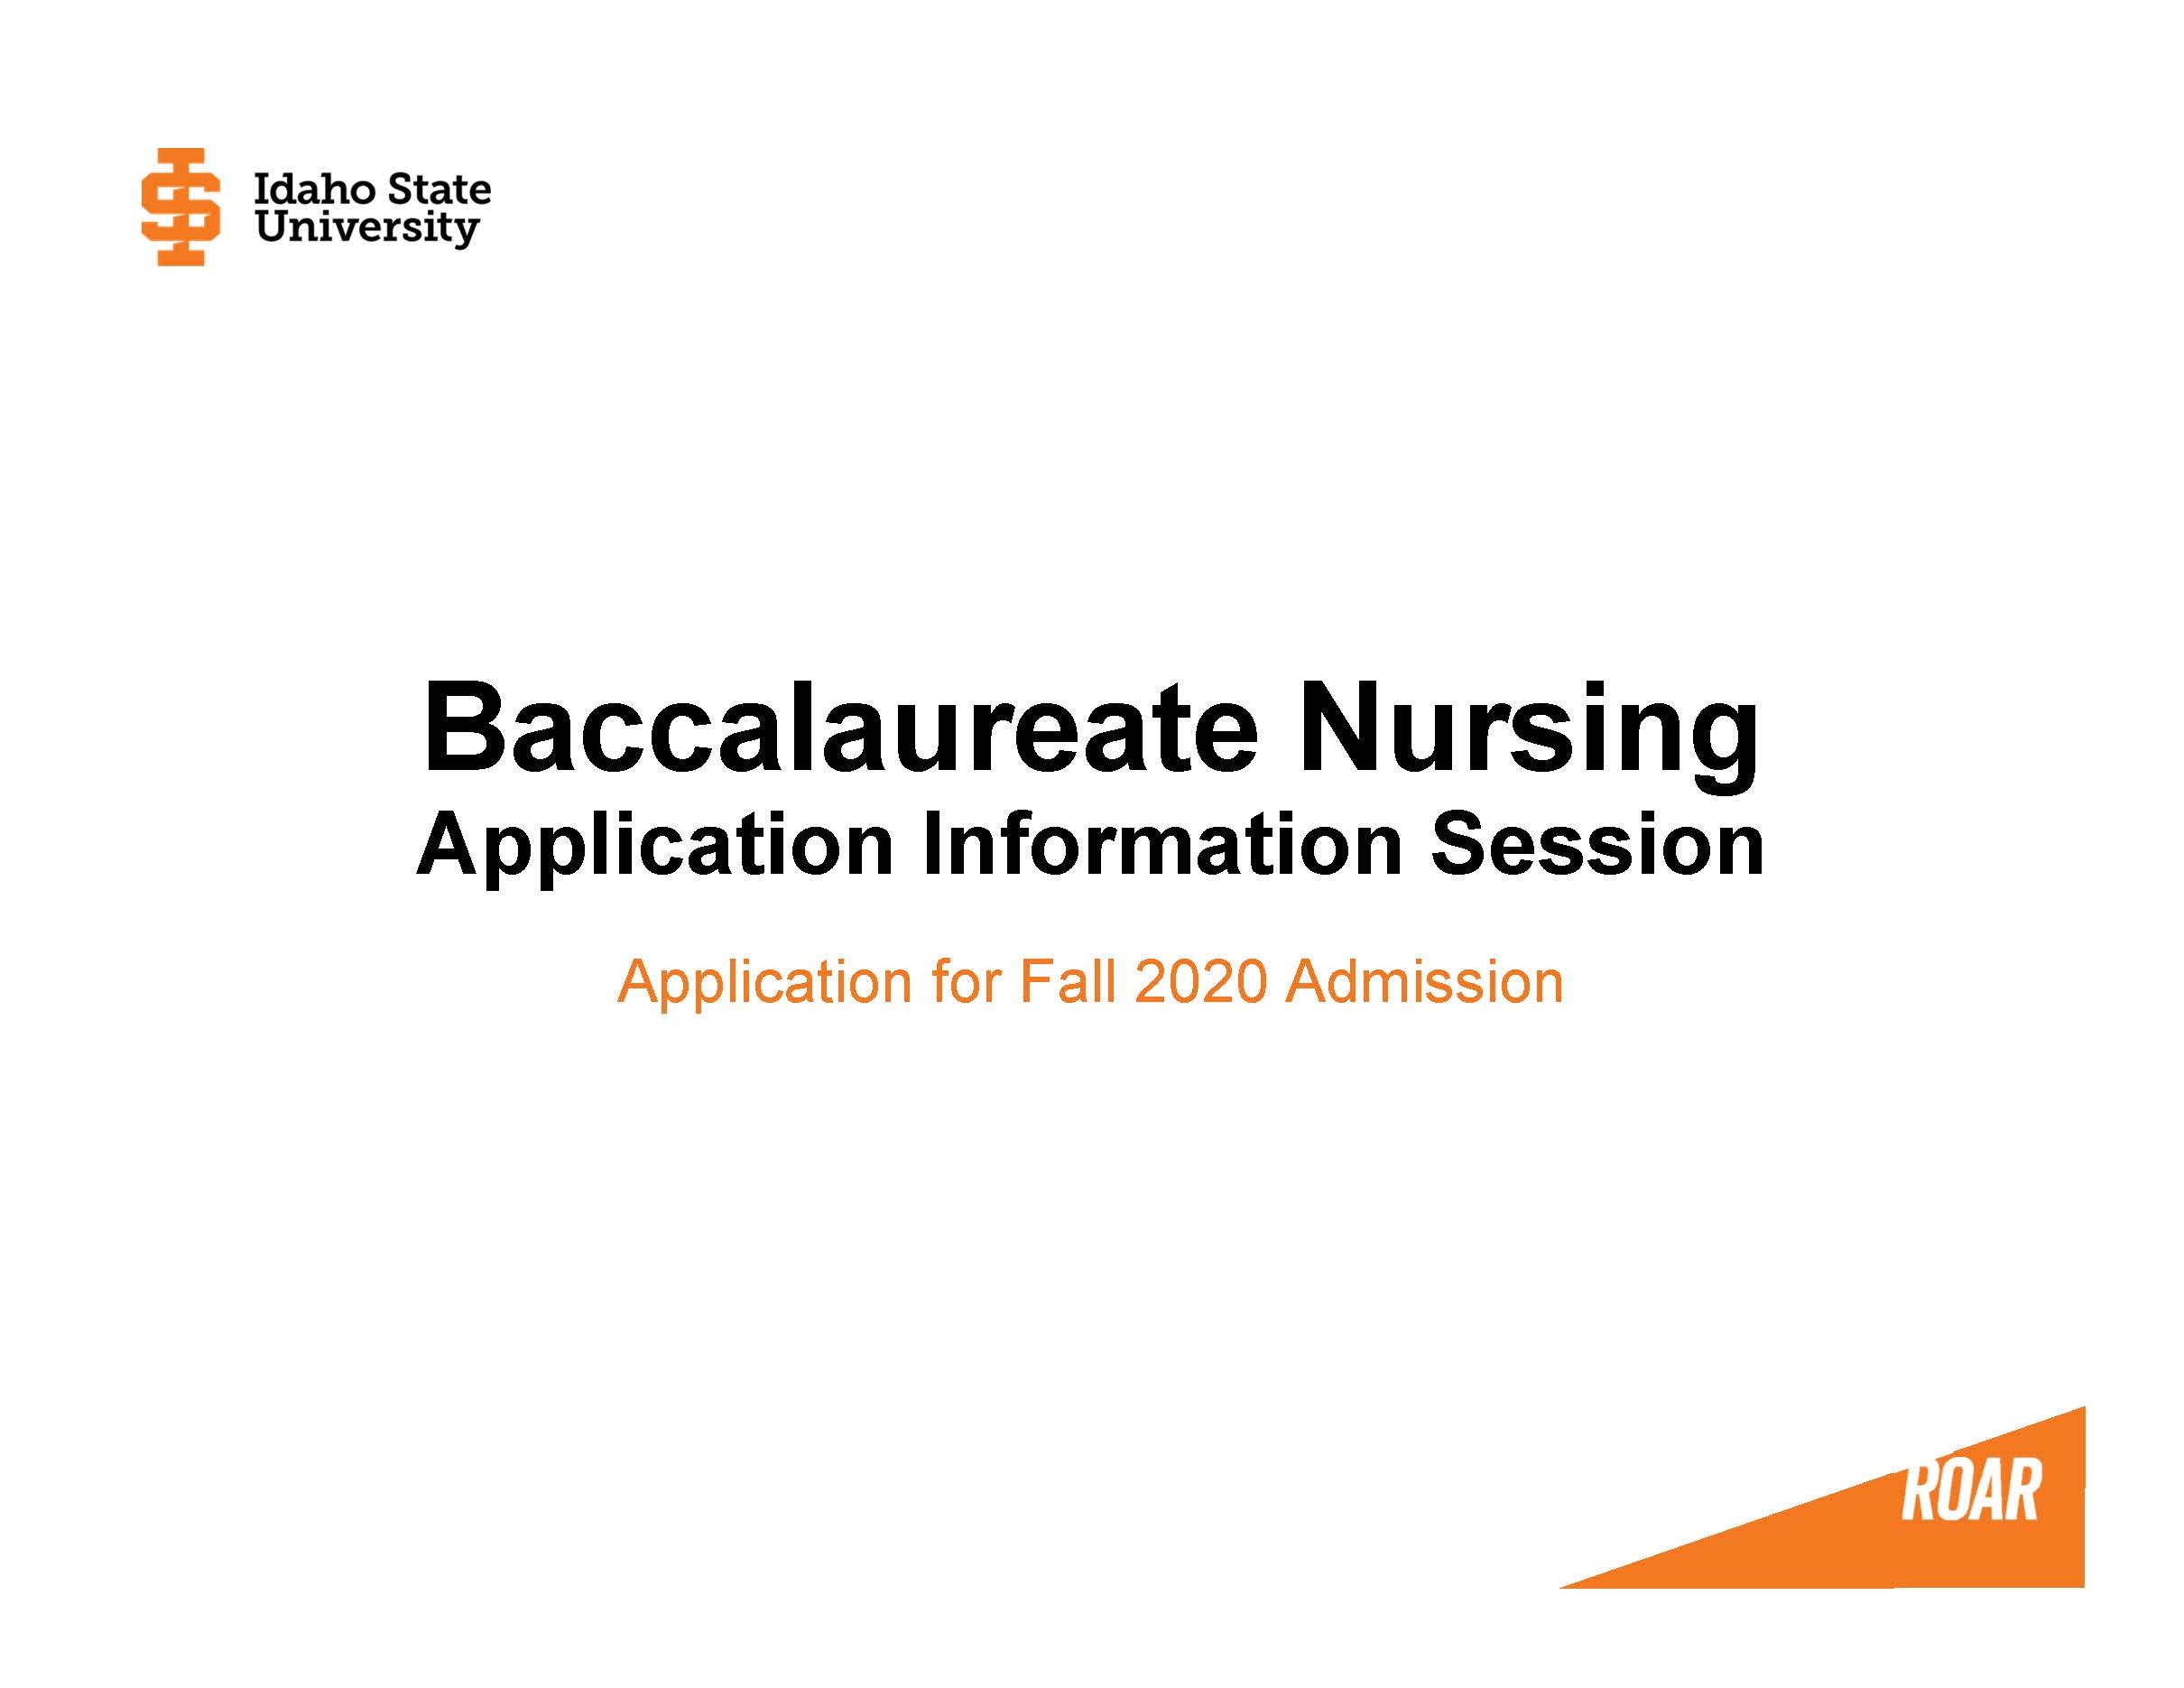 Traditional Bachelor of Science in NursingApplication Information Session